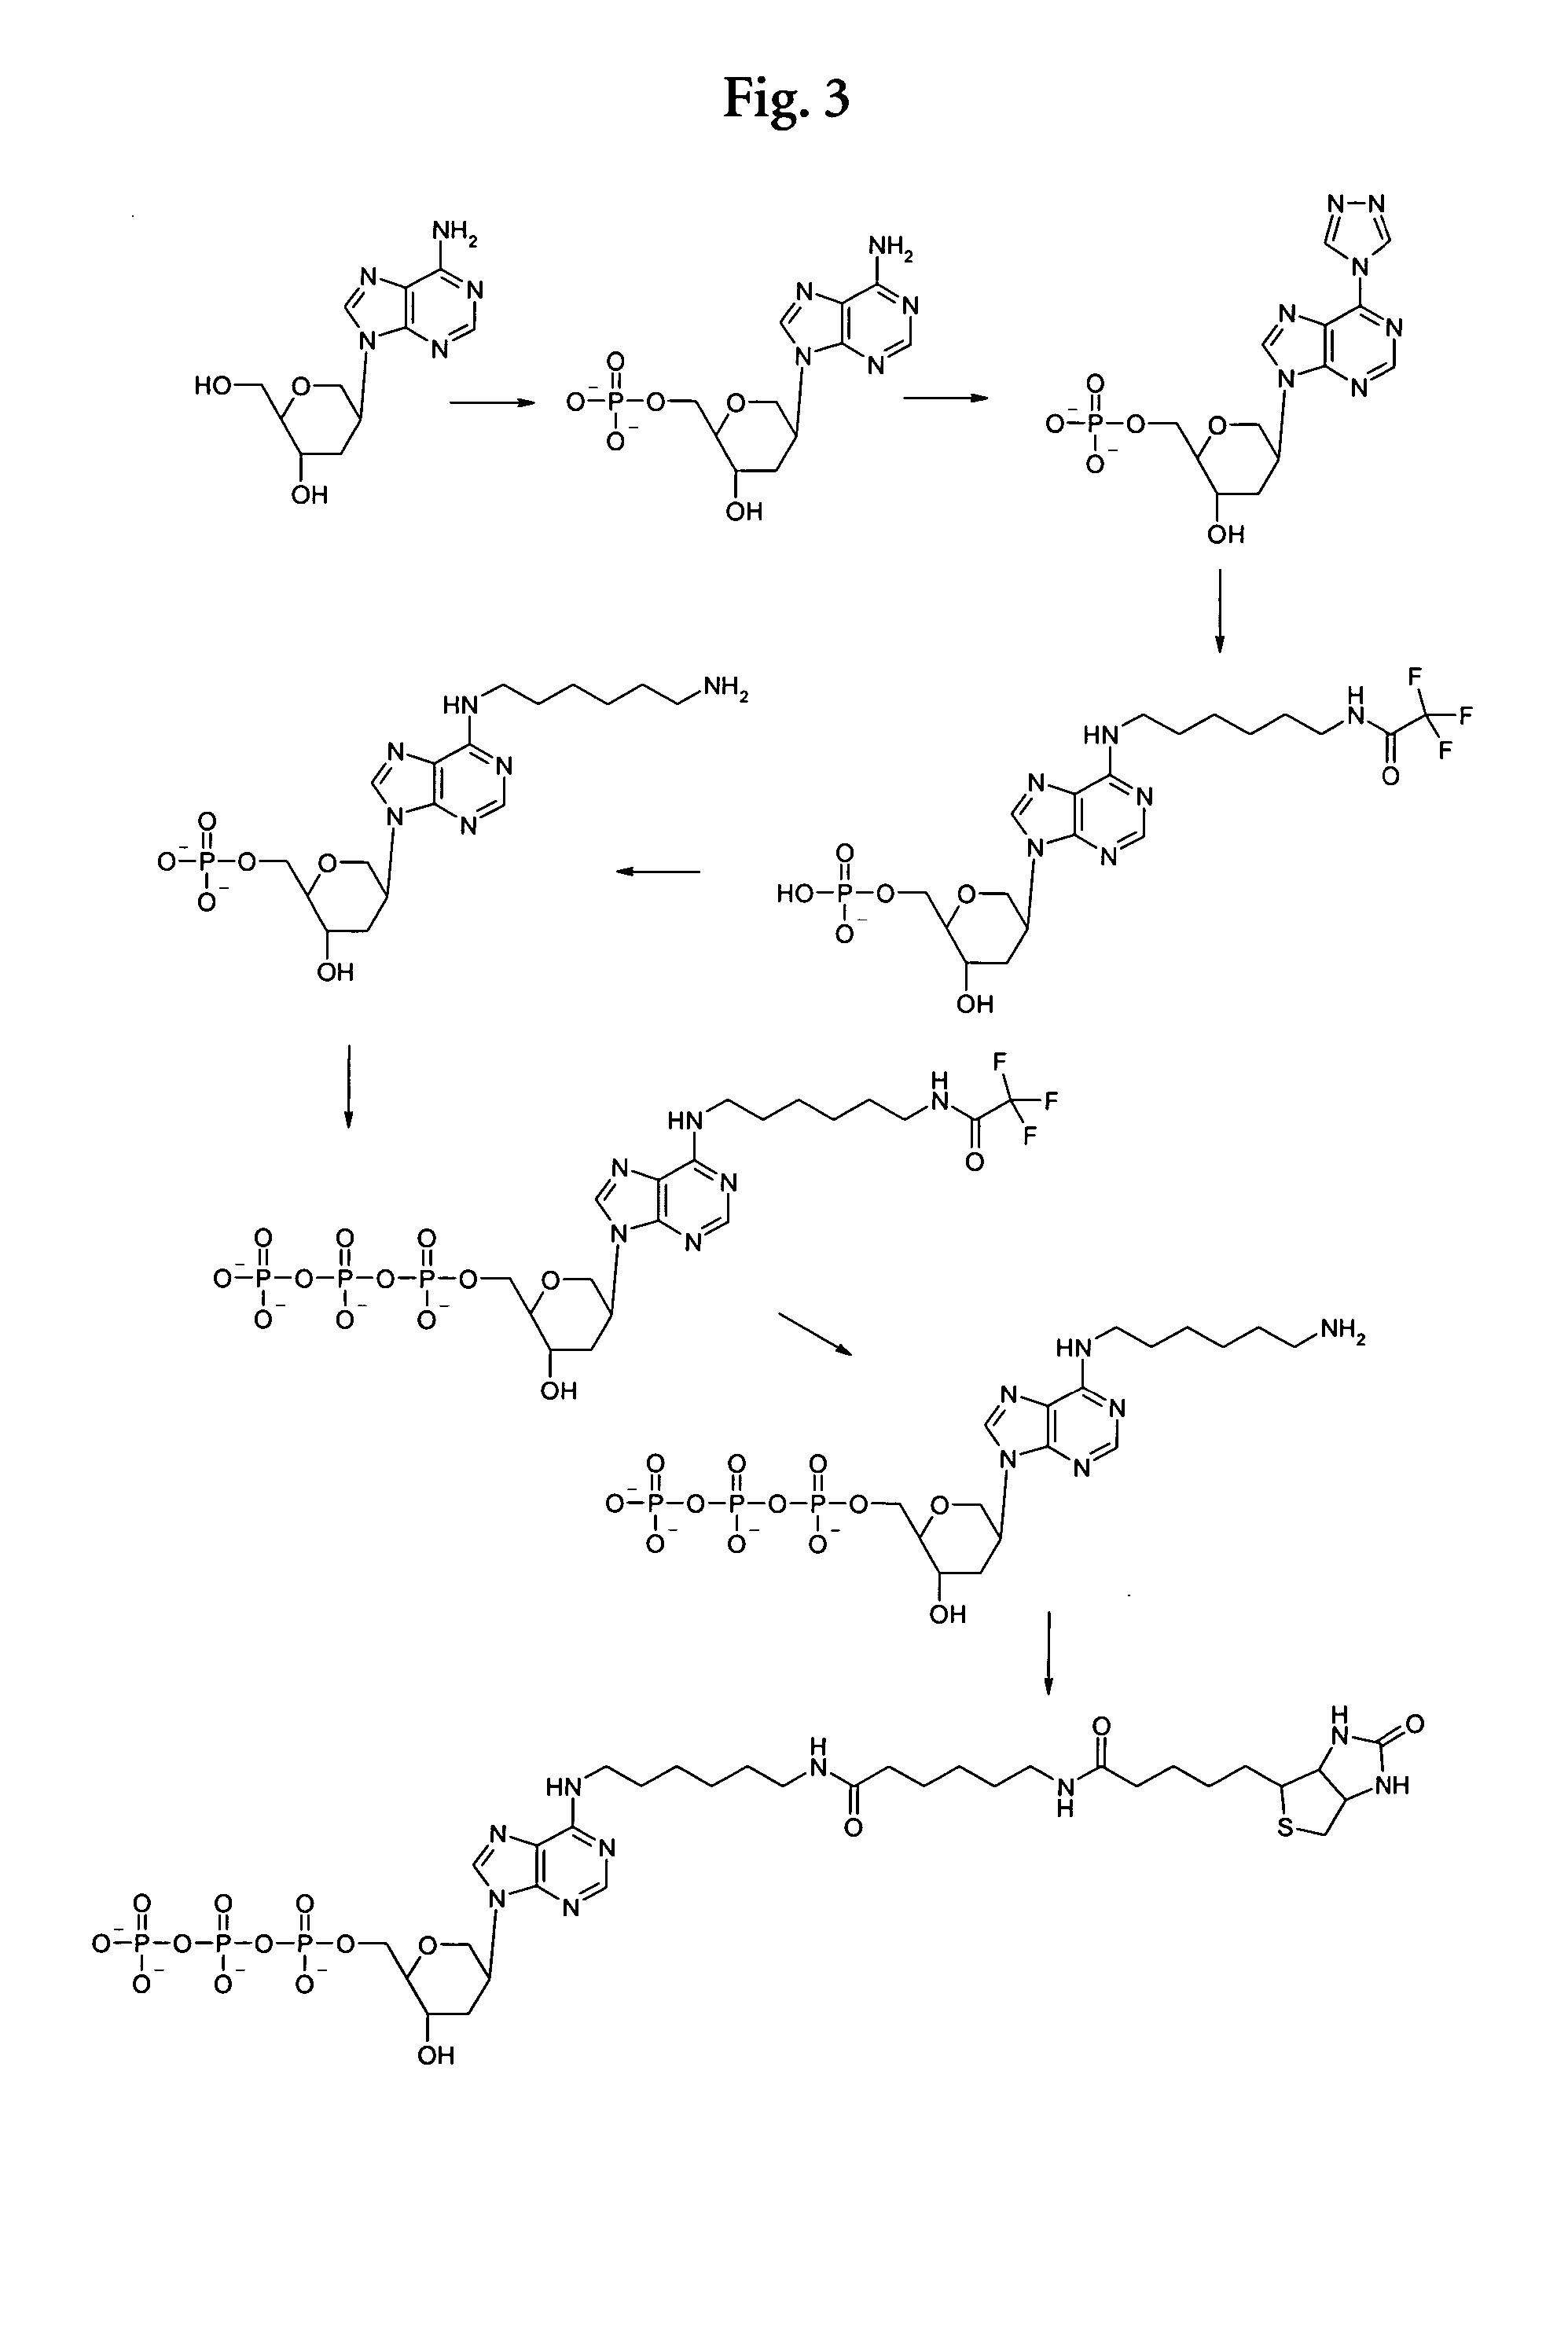 Nucleotide analogs with six-membered rings